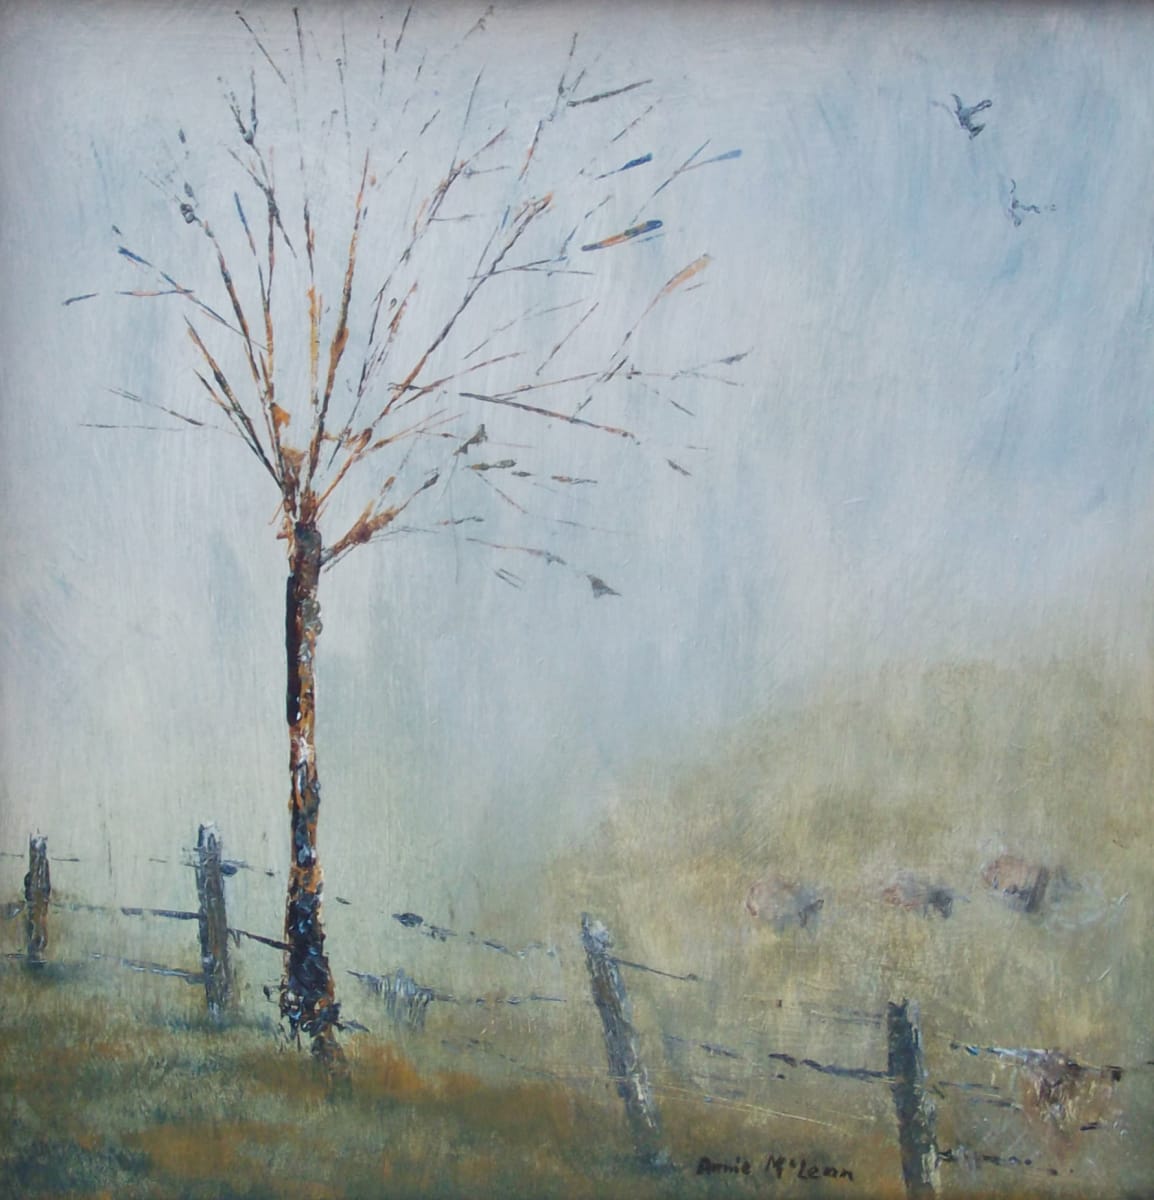 Morning Mist by Annie McLean  Image: MORNING MIST by Annie McLean